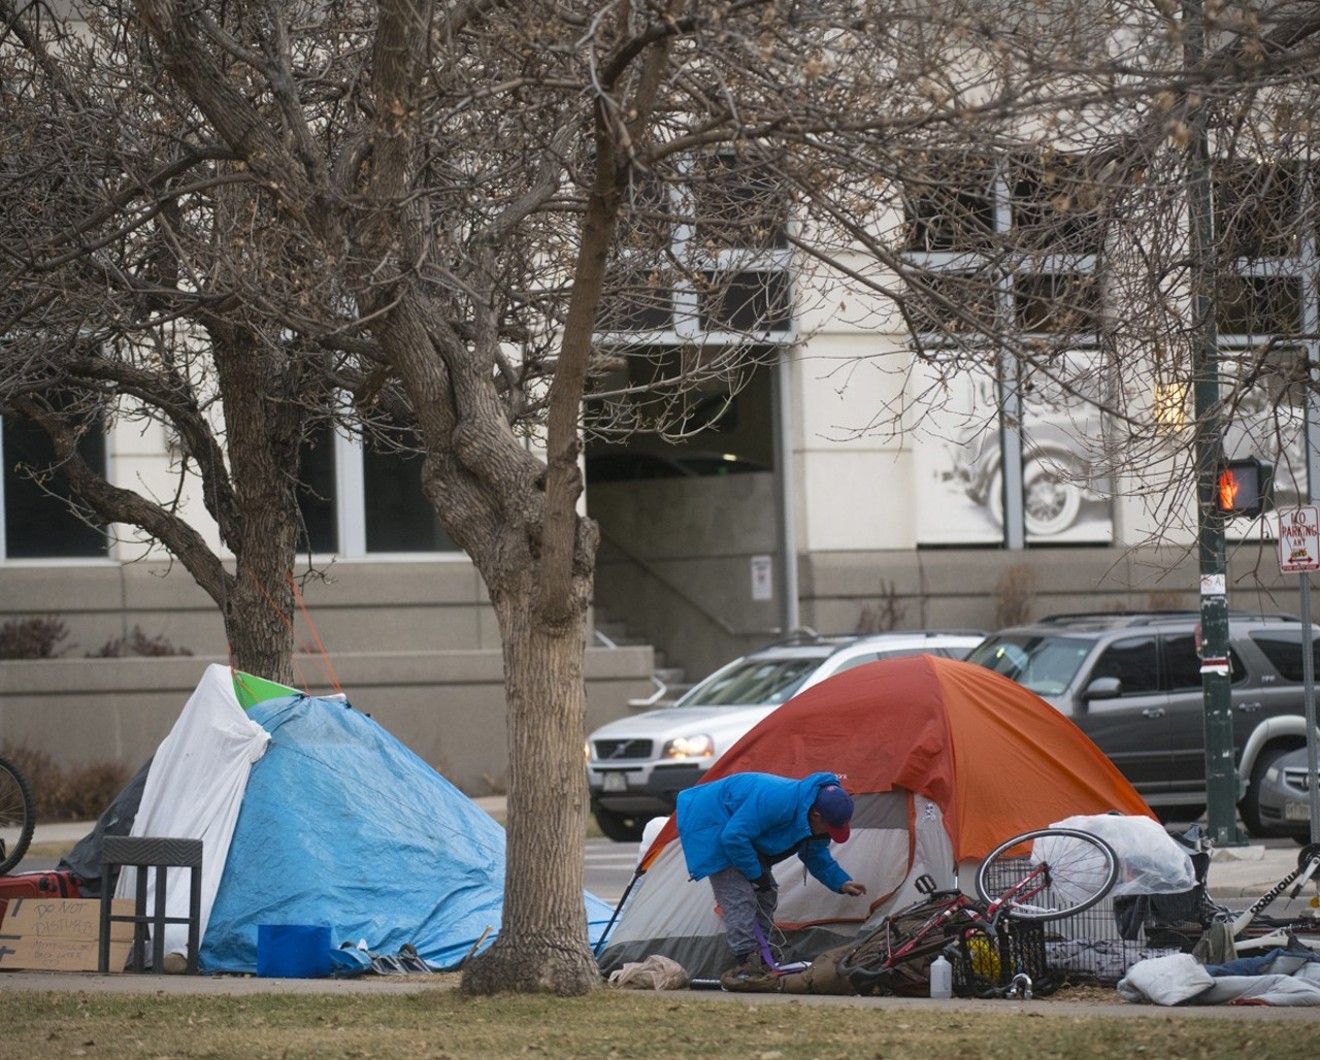 Denver has had an urban camping ban on the books since 2012.